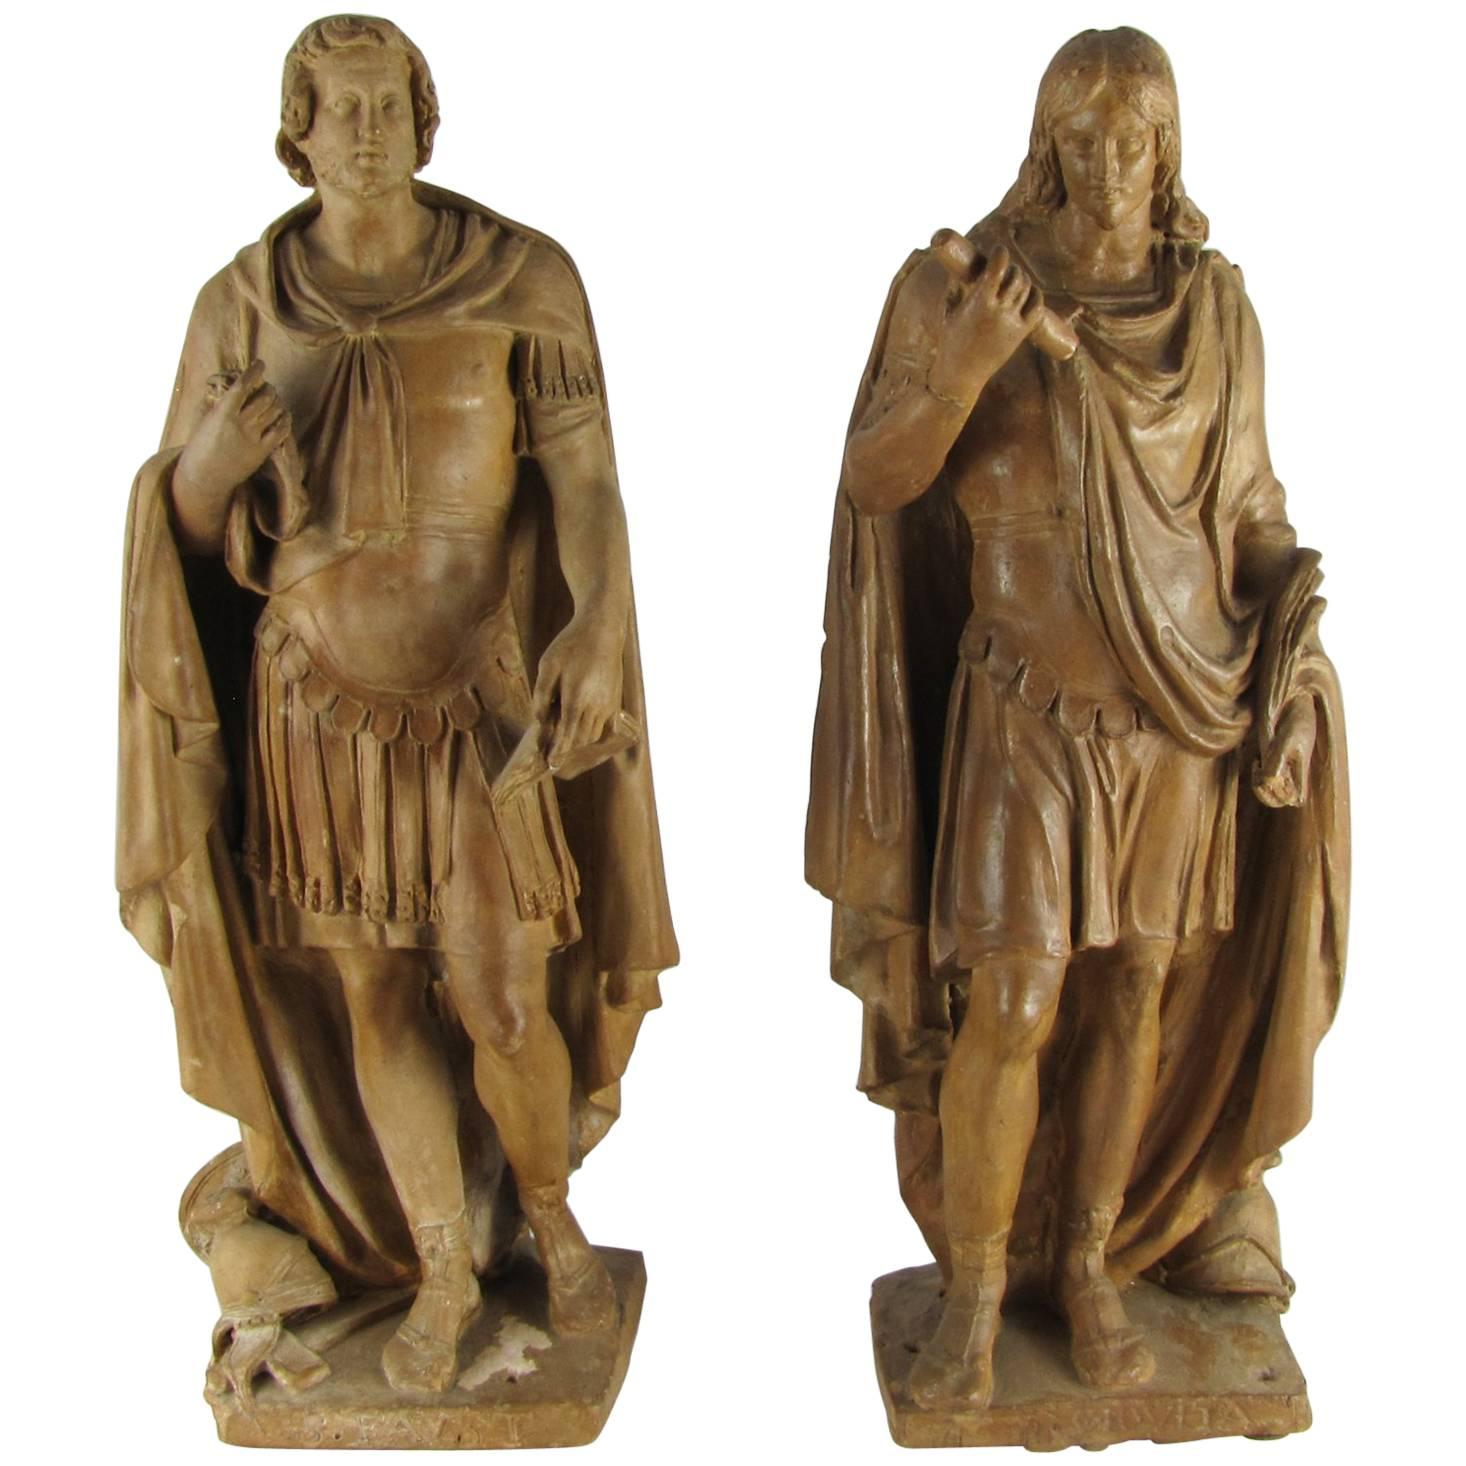 Two Early 18th Century Italian Unglazed Terracotta Sculptures Depicting Saints